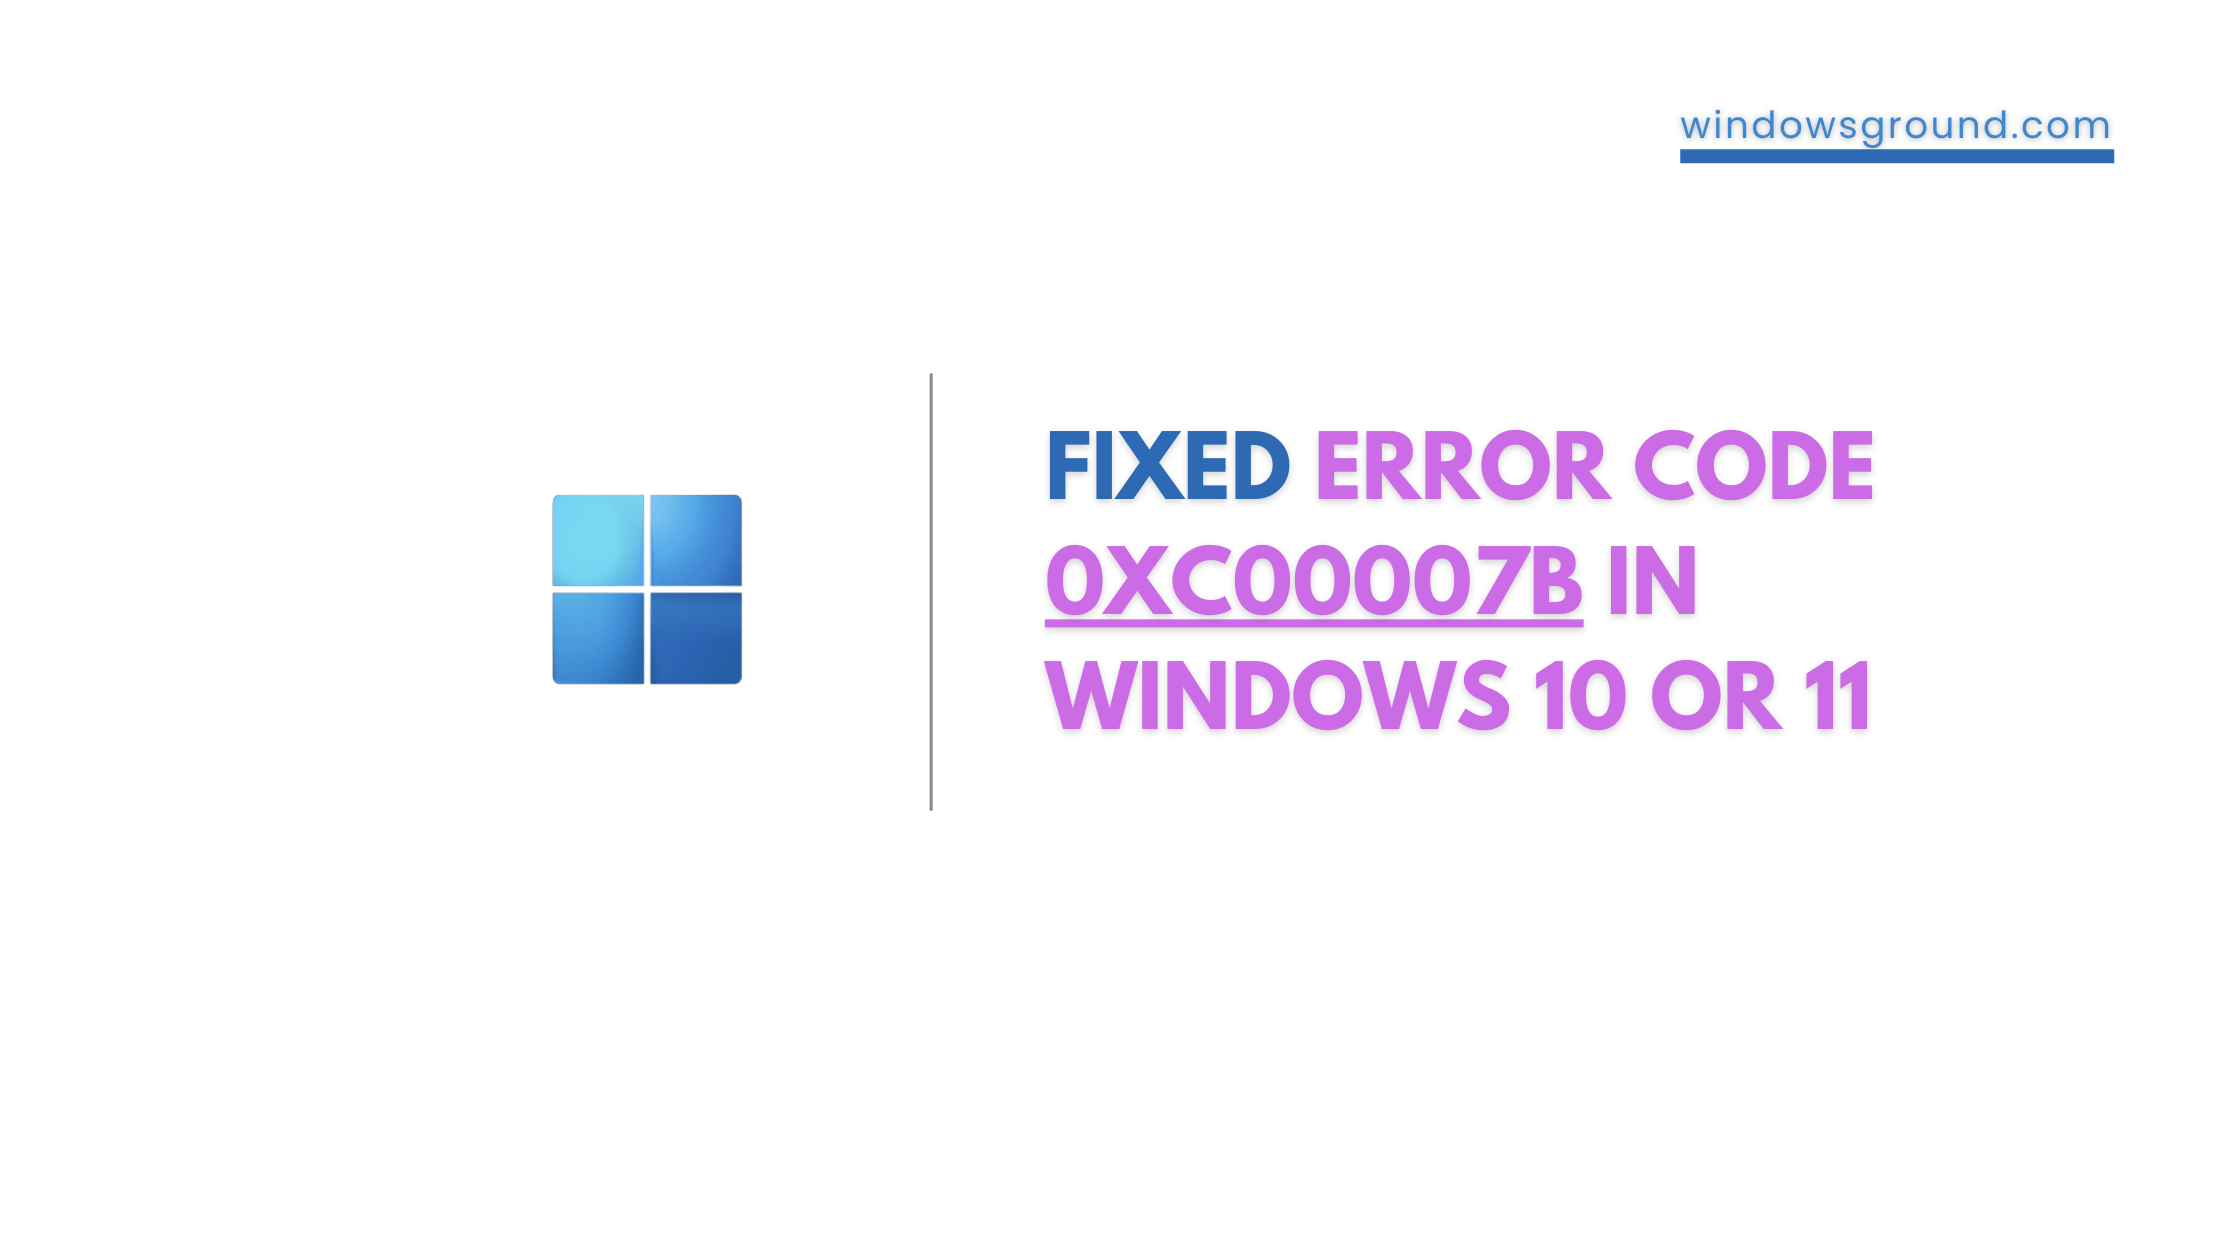 Fixed Error 0xc00007b In Windows 10 Or 11 Application Was Unable To Start Correctly